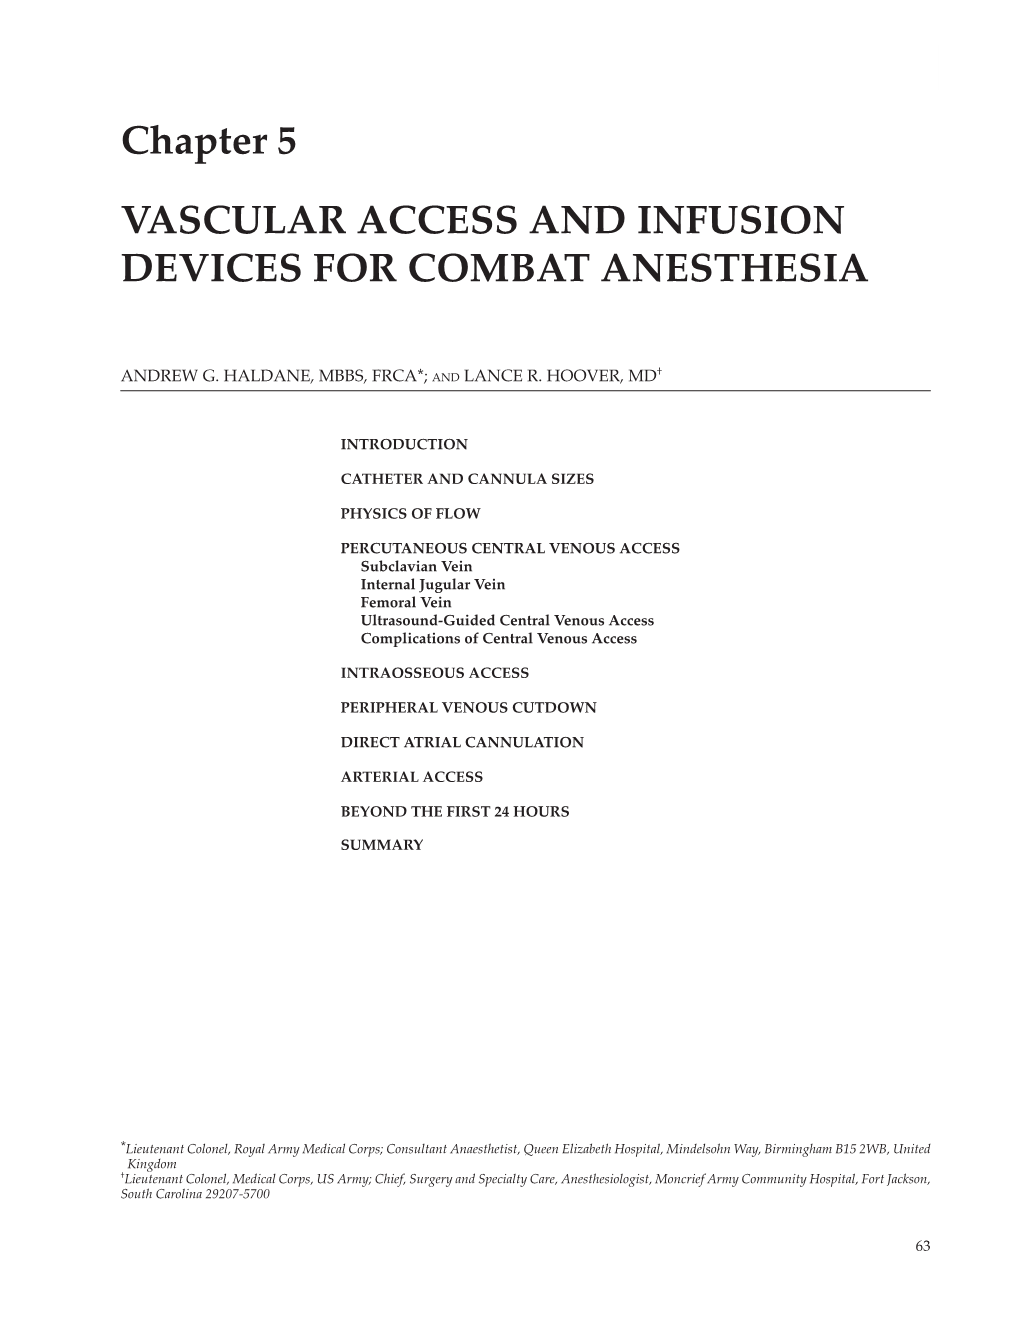 Vascular Access and Infusion Devices for Combat Anesthesia